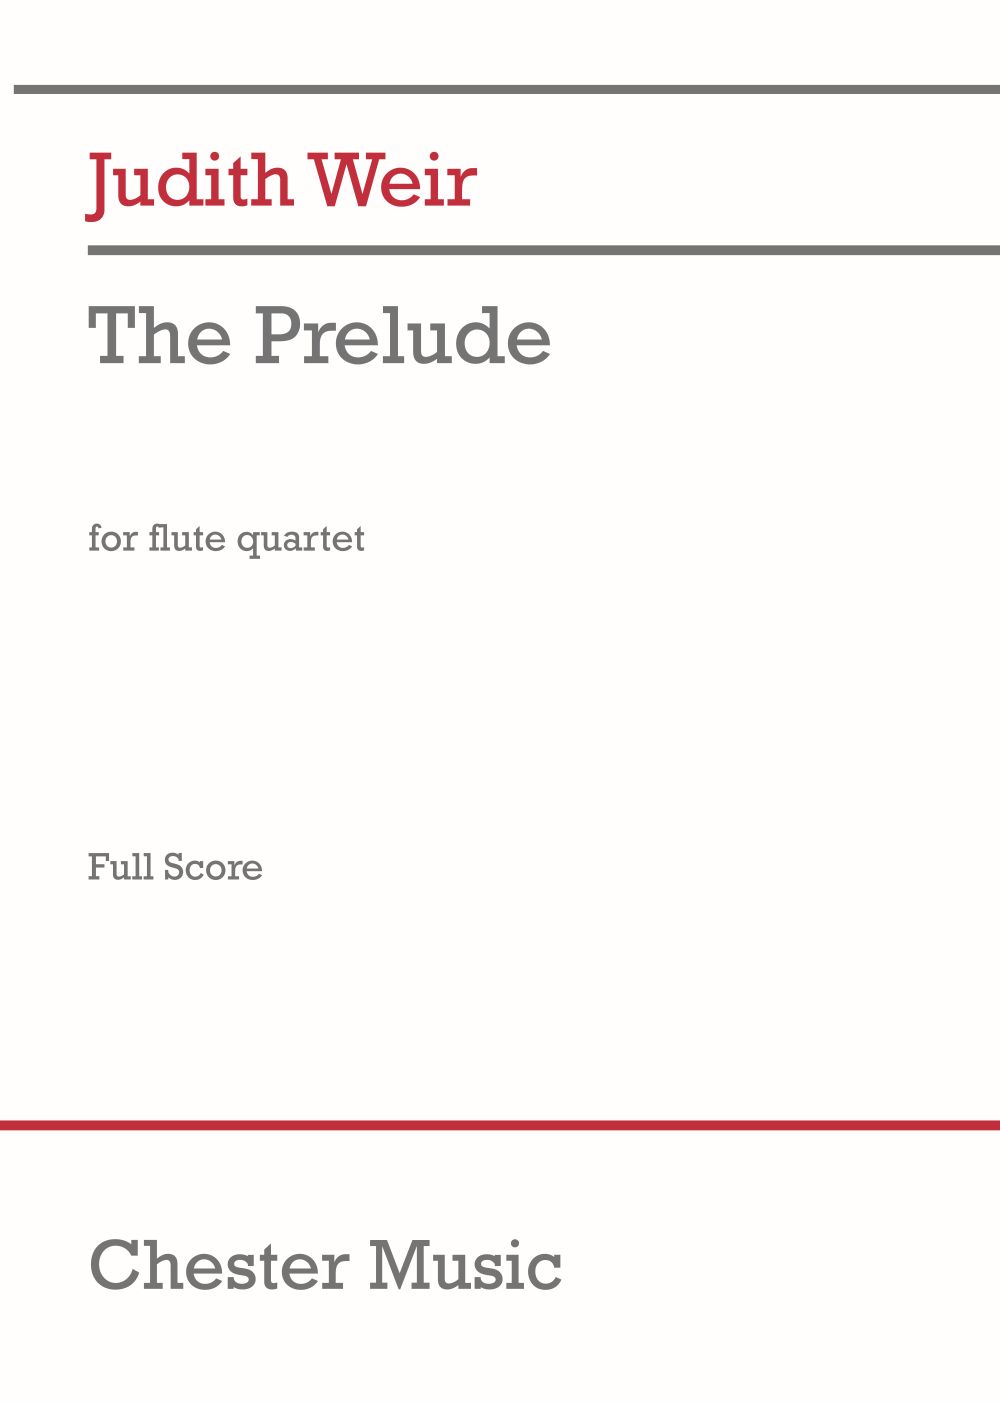 The Prelude (WEIR JUDITH)